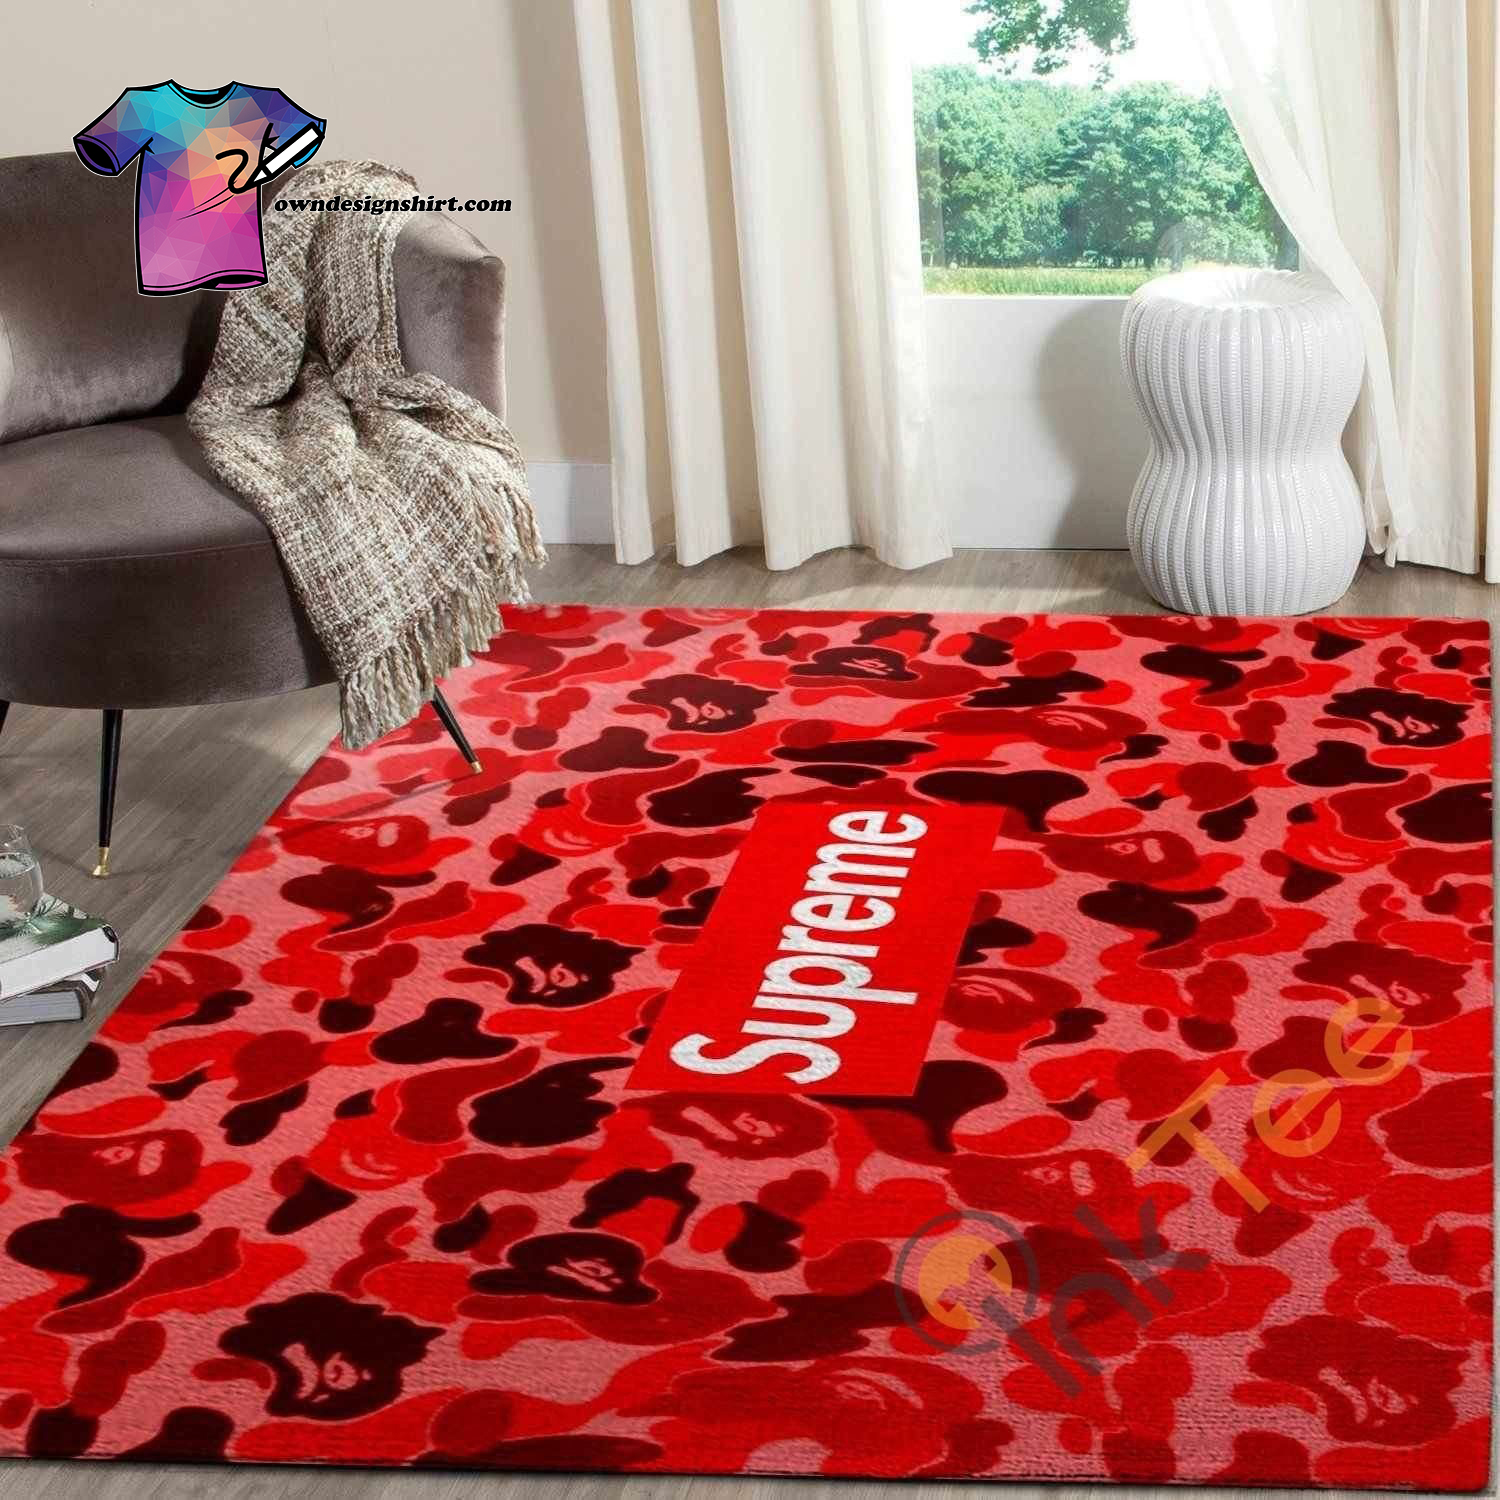 The best selling] Supreme Bape Camo Red Version Living Room Rug